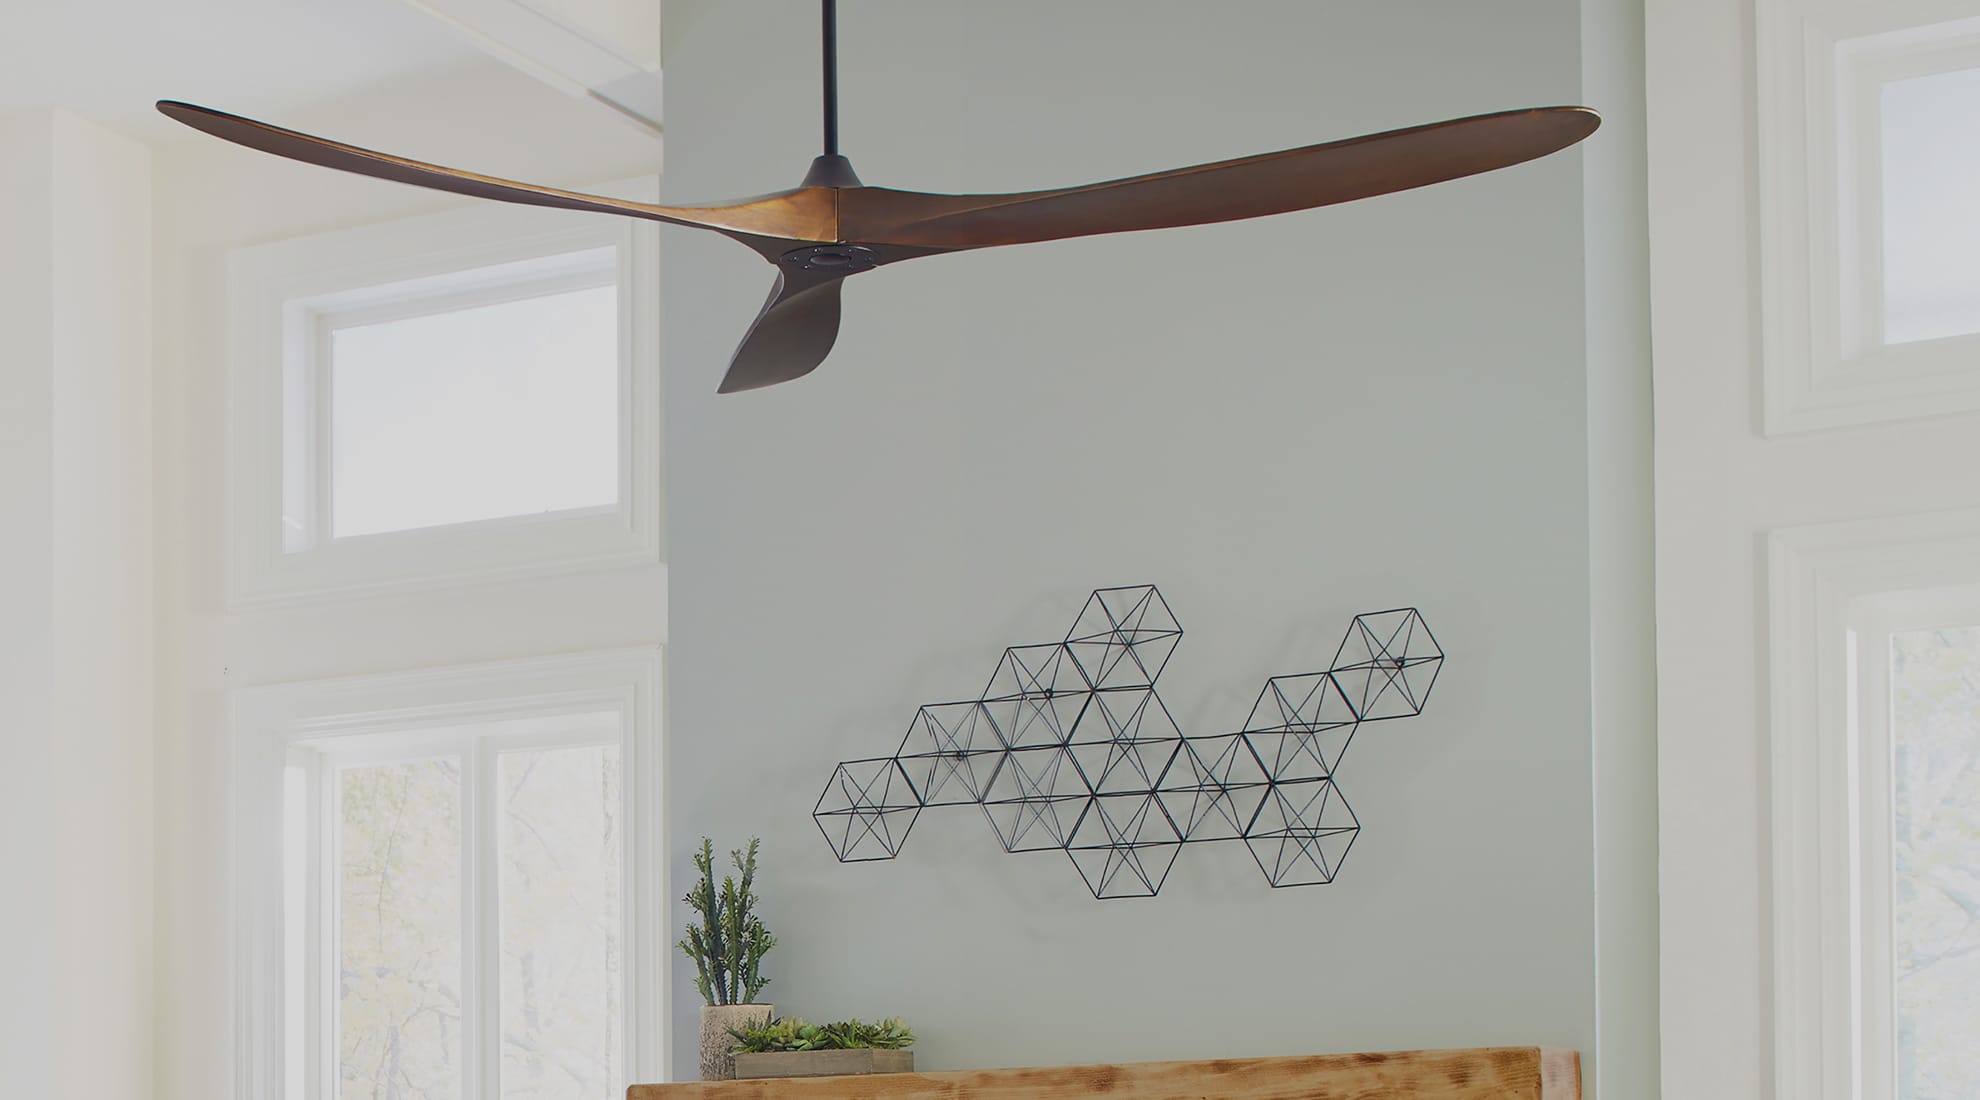 Ceiling Fan Sizes Size, What Are Sizes Of Ceiling Fans